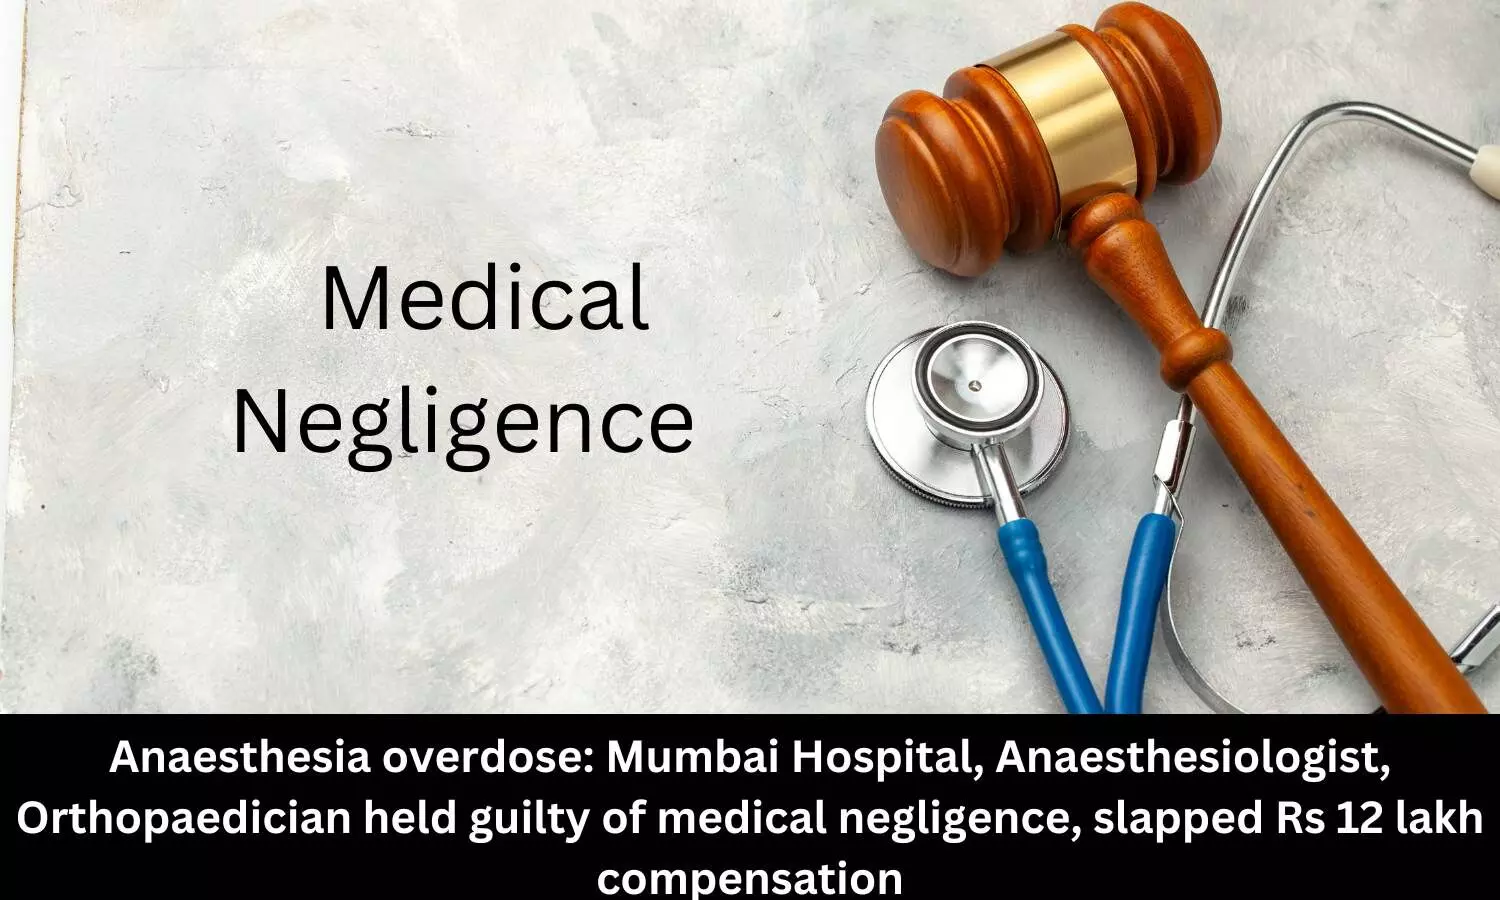 Anaesthesia overdose: Mumbai Hospital, Anaesthesiologist, Orthopaedician held guilty of medical negligence, slapped Rs 12 lakh compensation